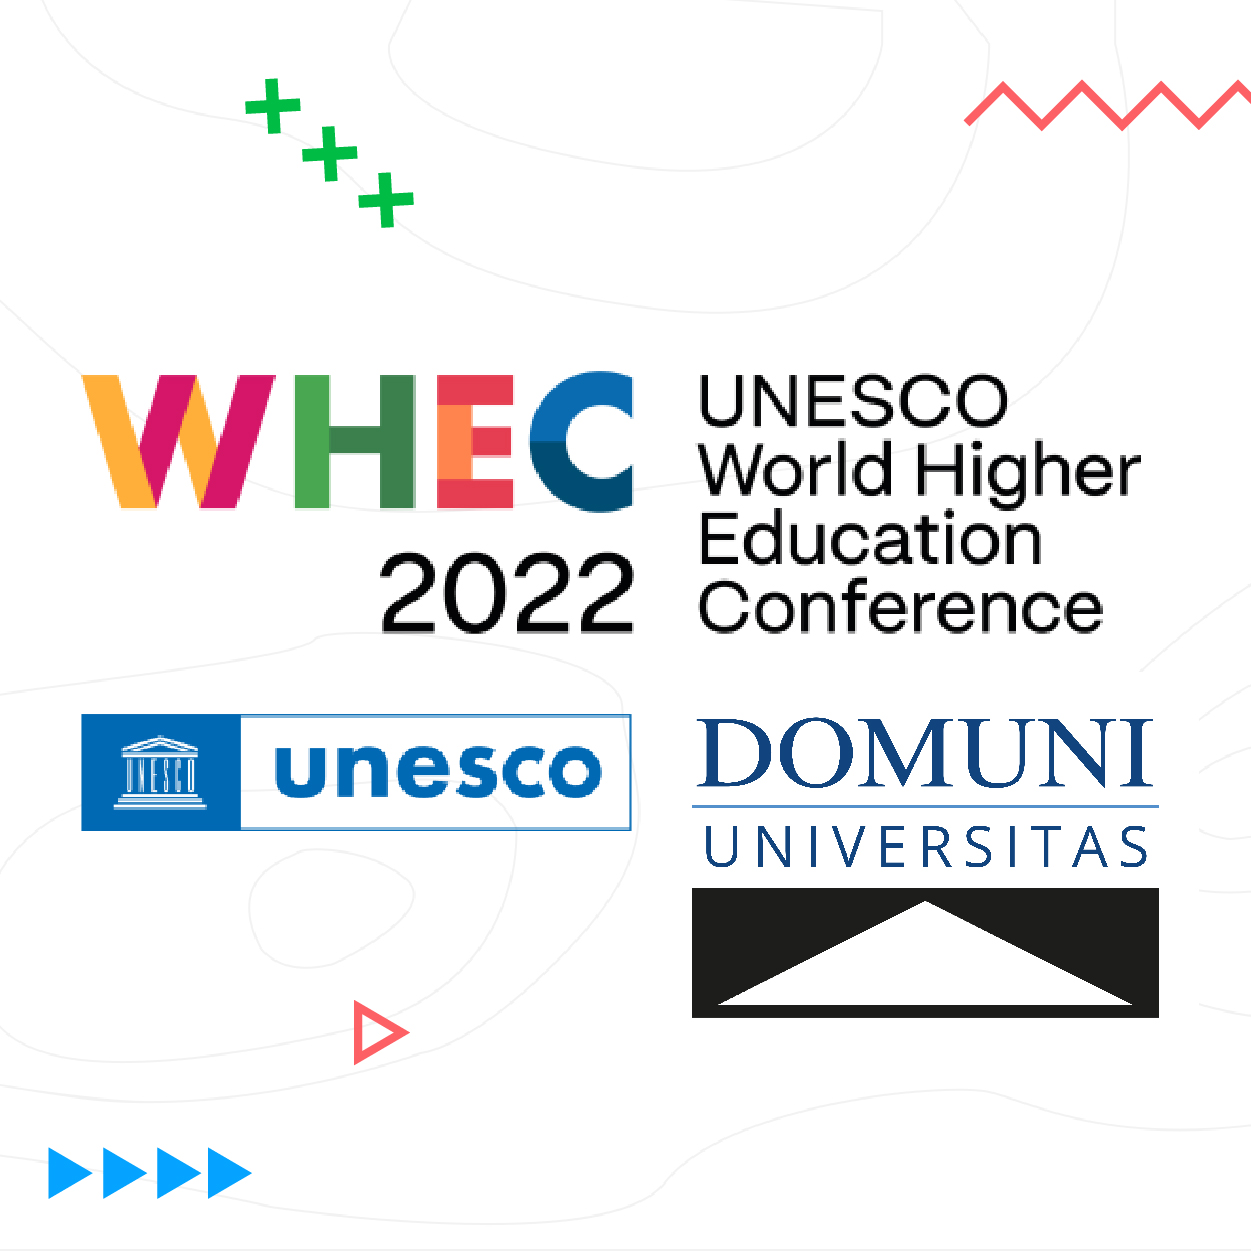 Domuni contributes to the UNESCO World Higher Education Conference